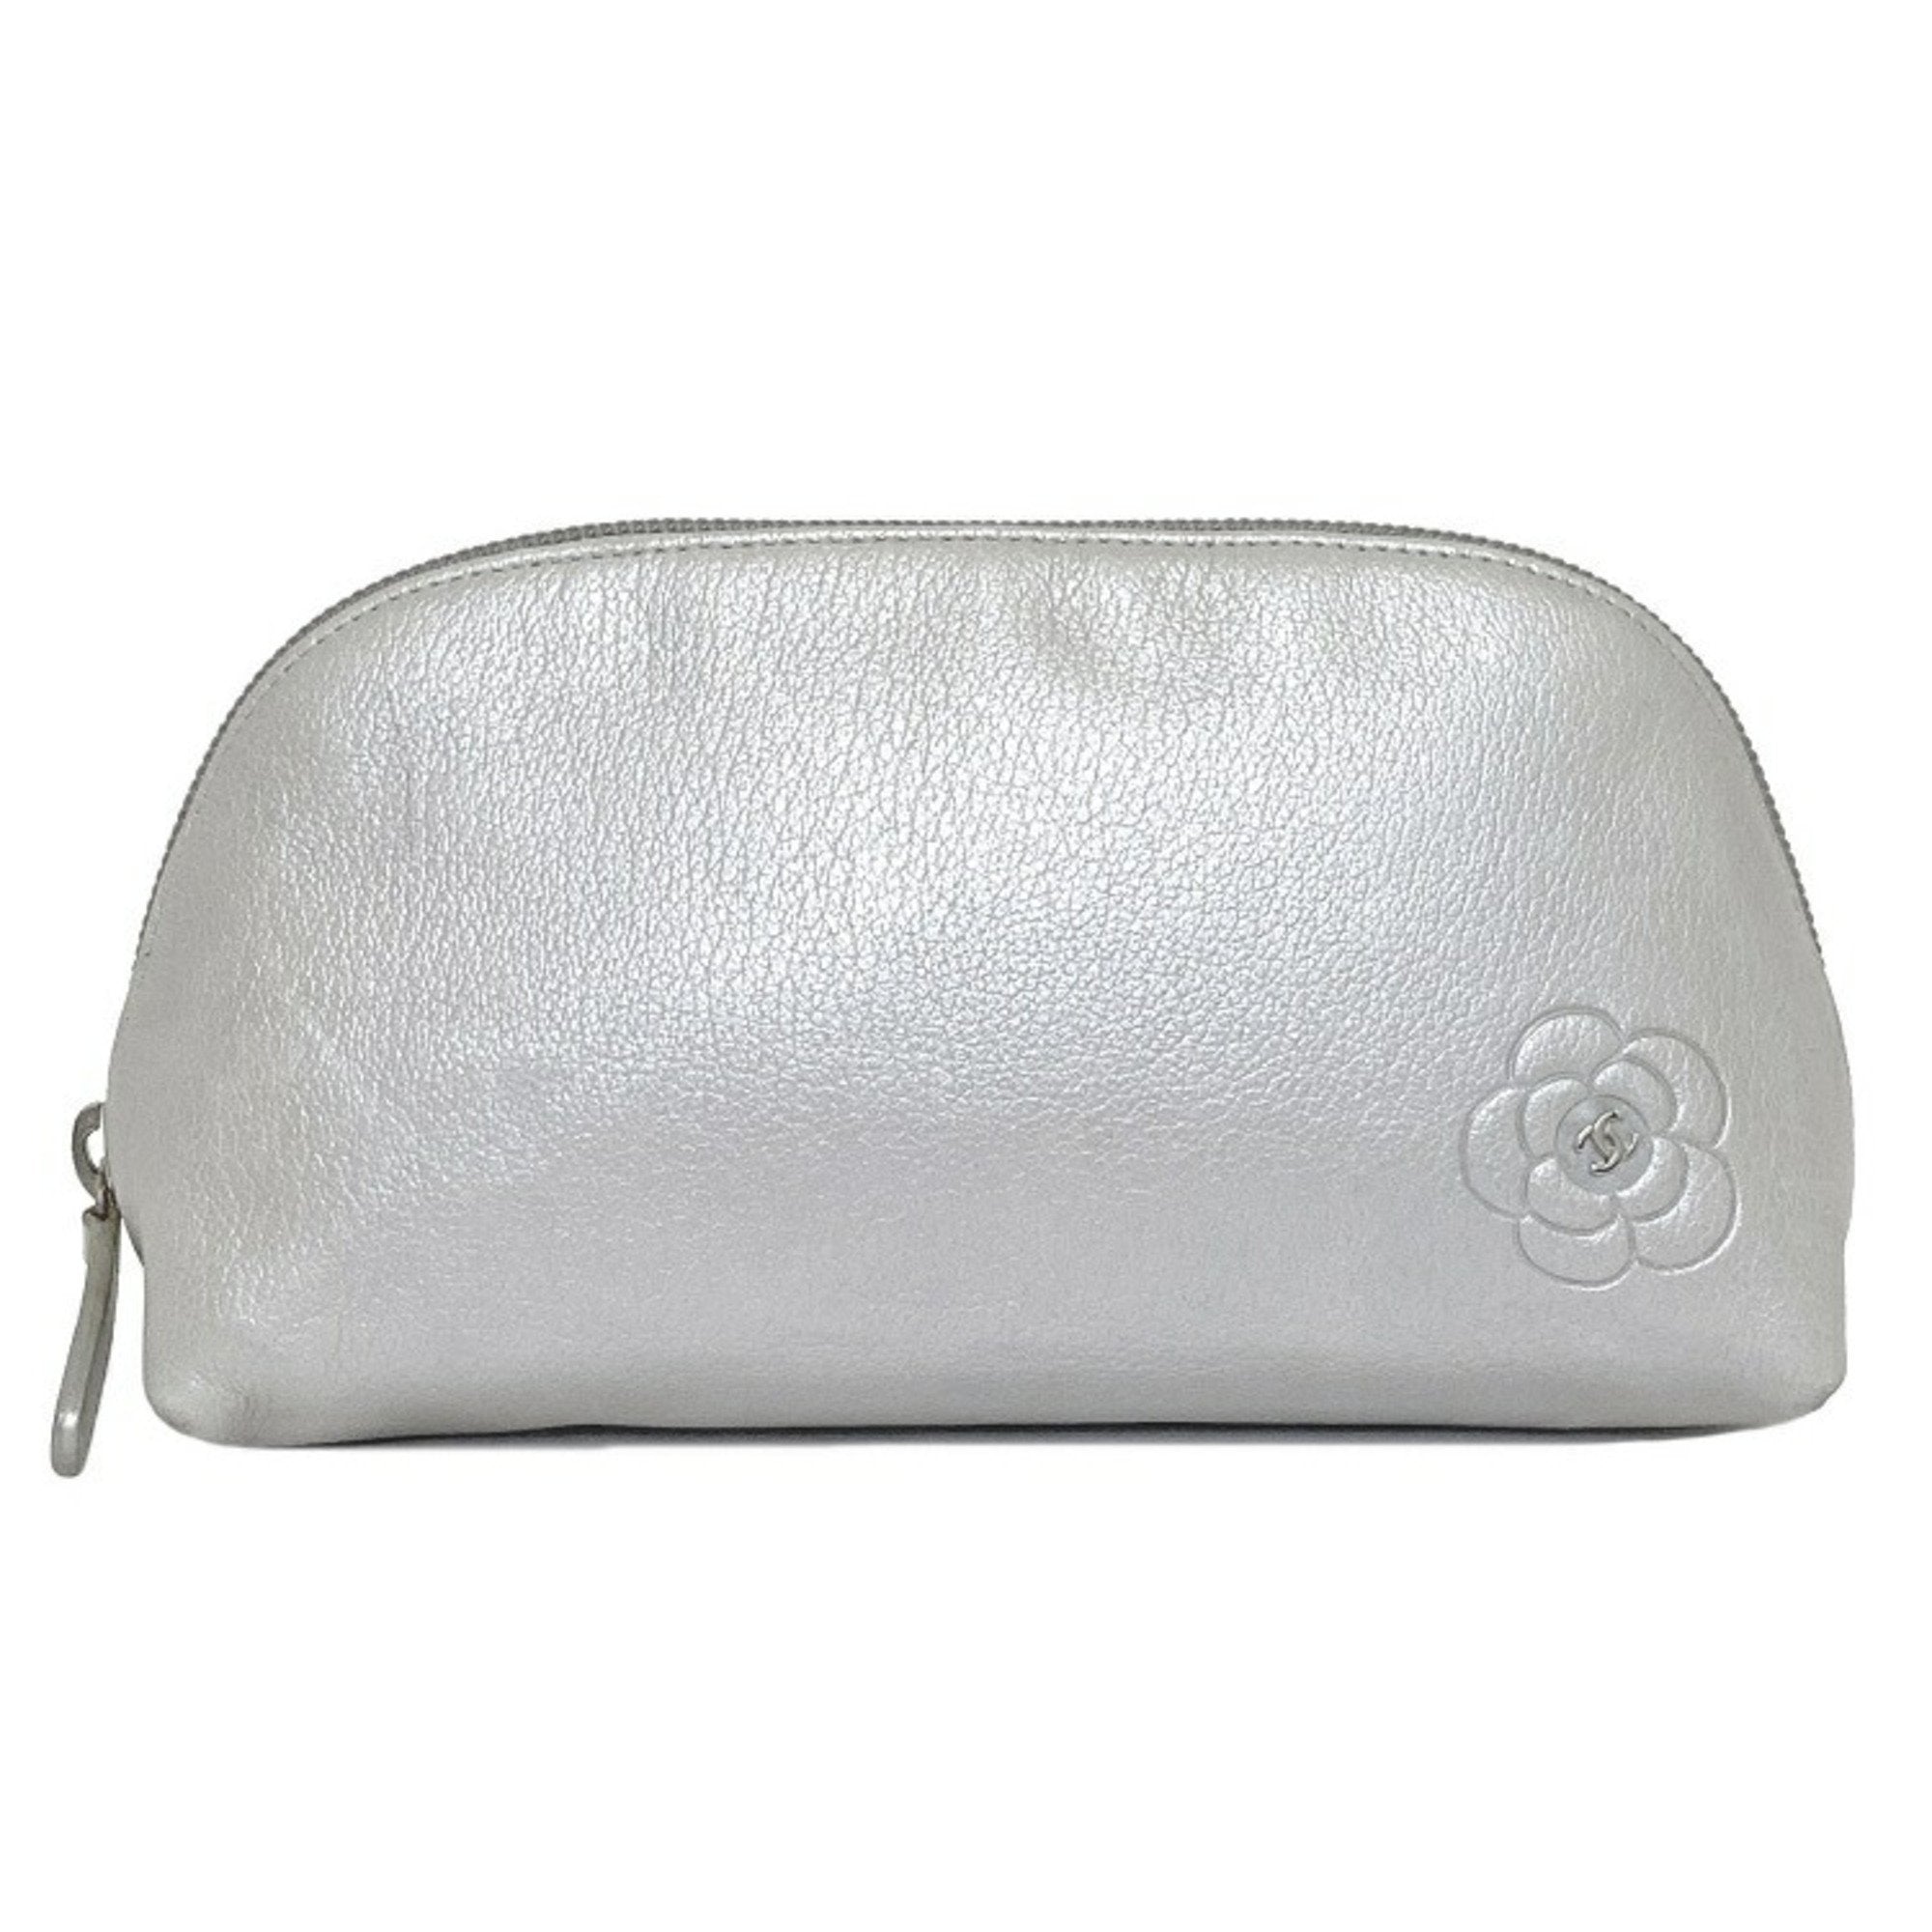 Chanel Pouch Silver Camellia 7522 Coco Mark Leather Lambskin 13s CHANE